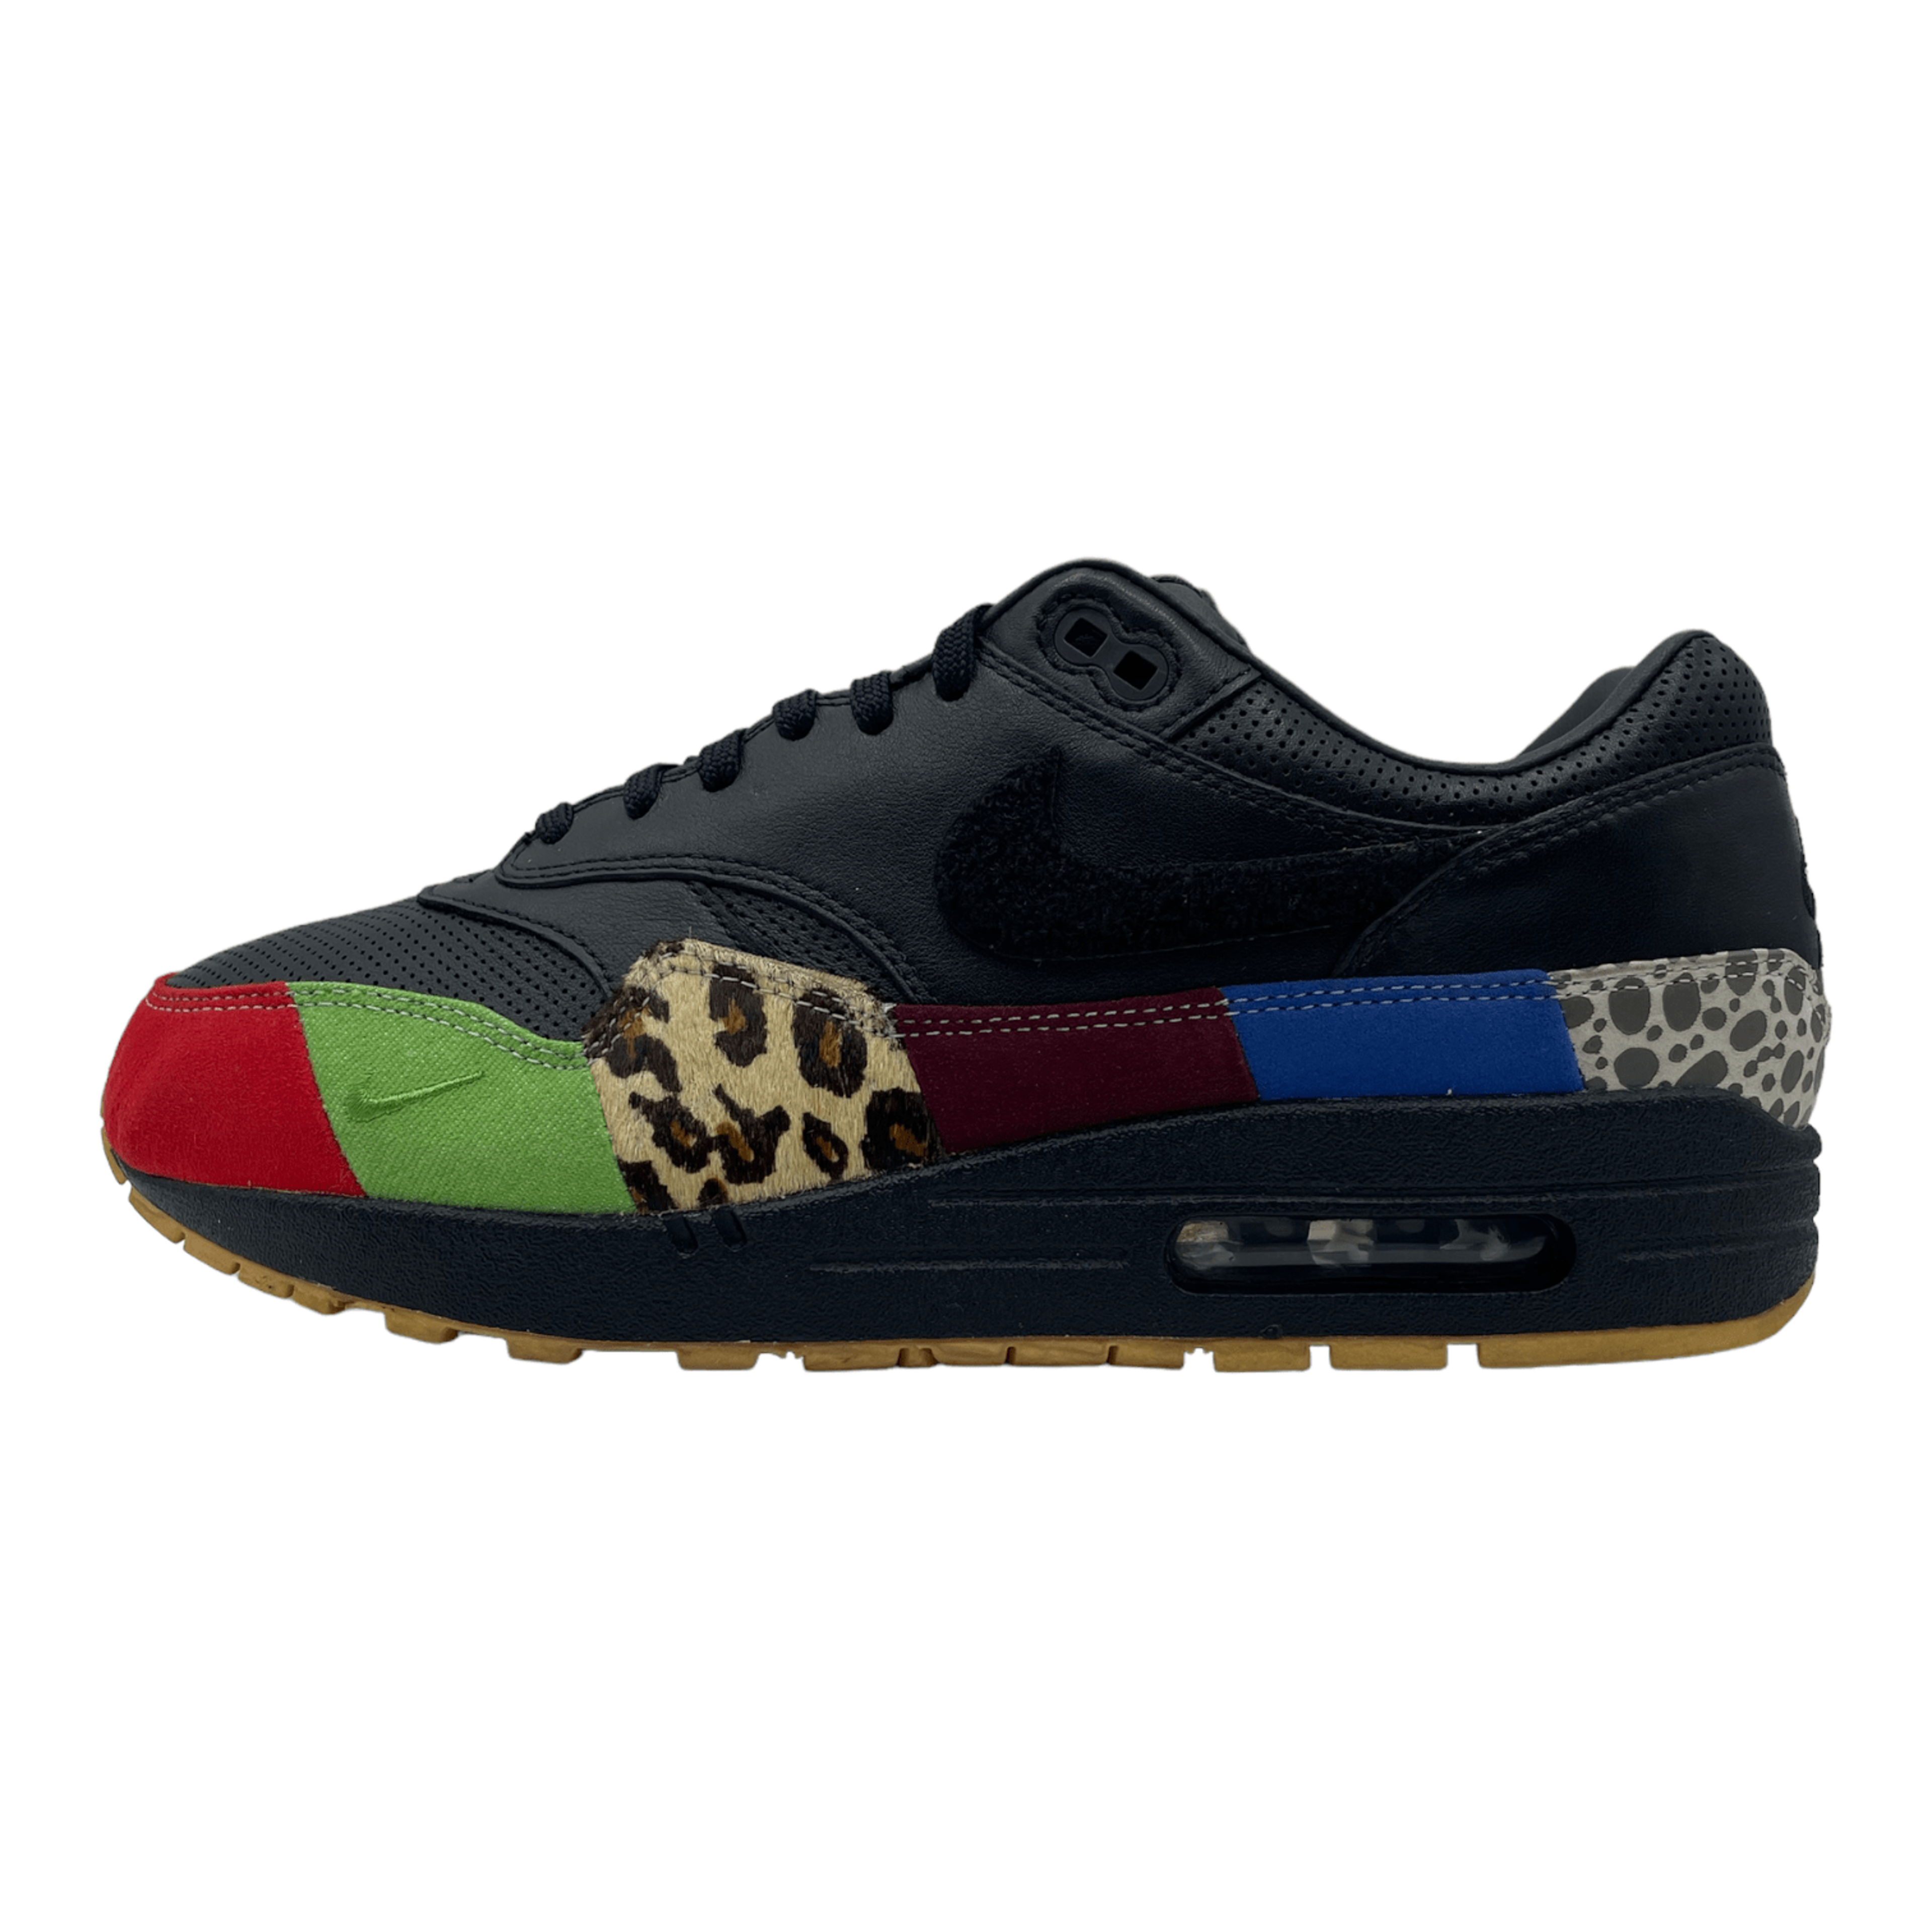 Alternate View 1 of Nike Air Max 1 Master Pre-Owned